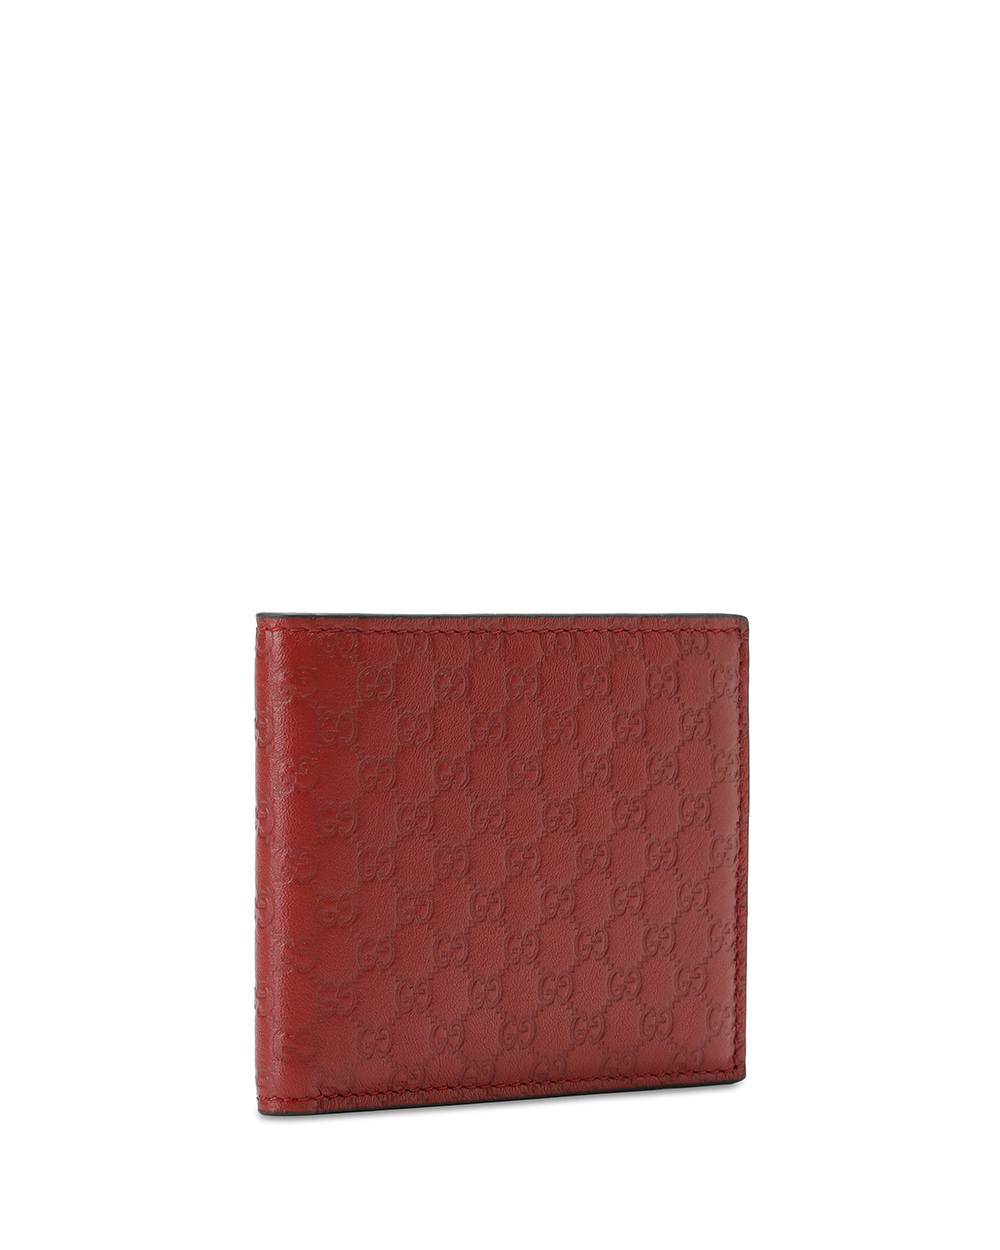 Image 3 of GUCCI WALLET ウォレット 365466 BMJ1R 6420